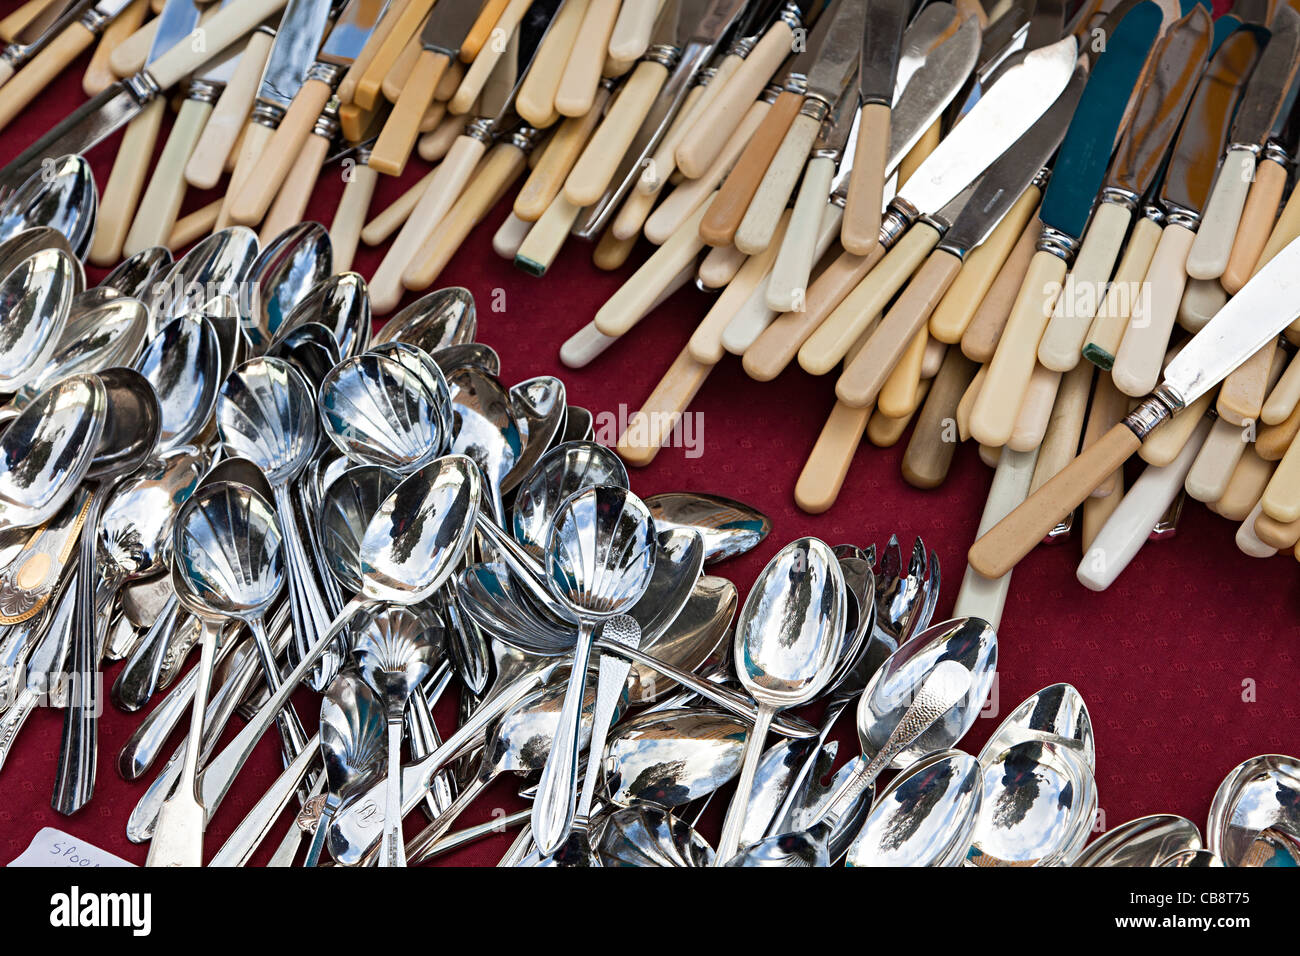 Second hand bone handled cutlery on sale at market stall Wales UK Stock Photo